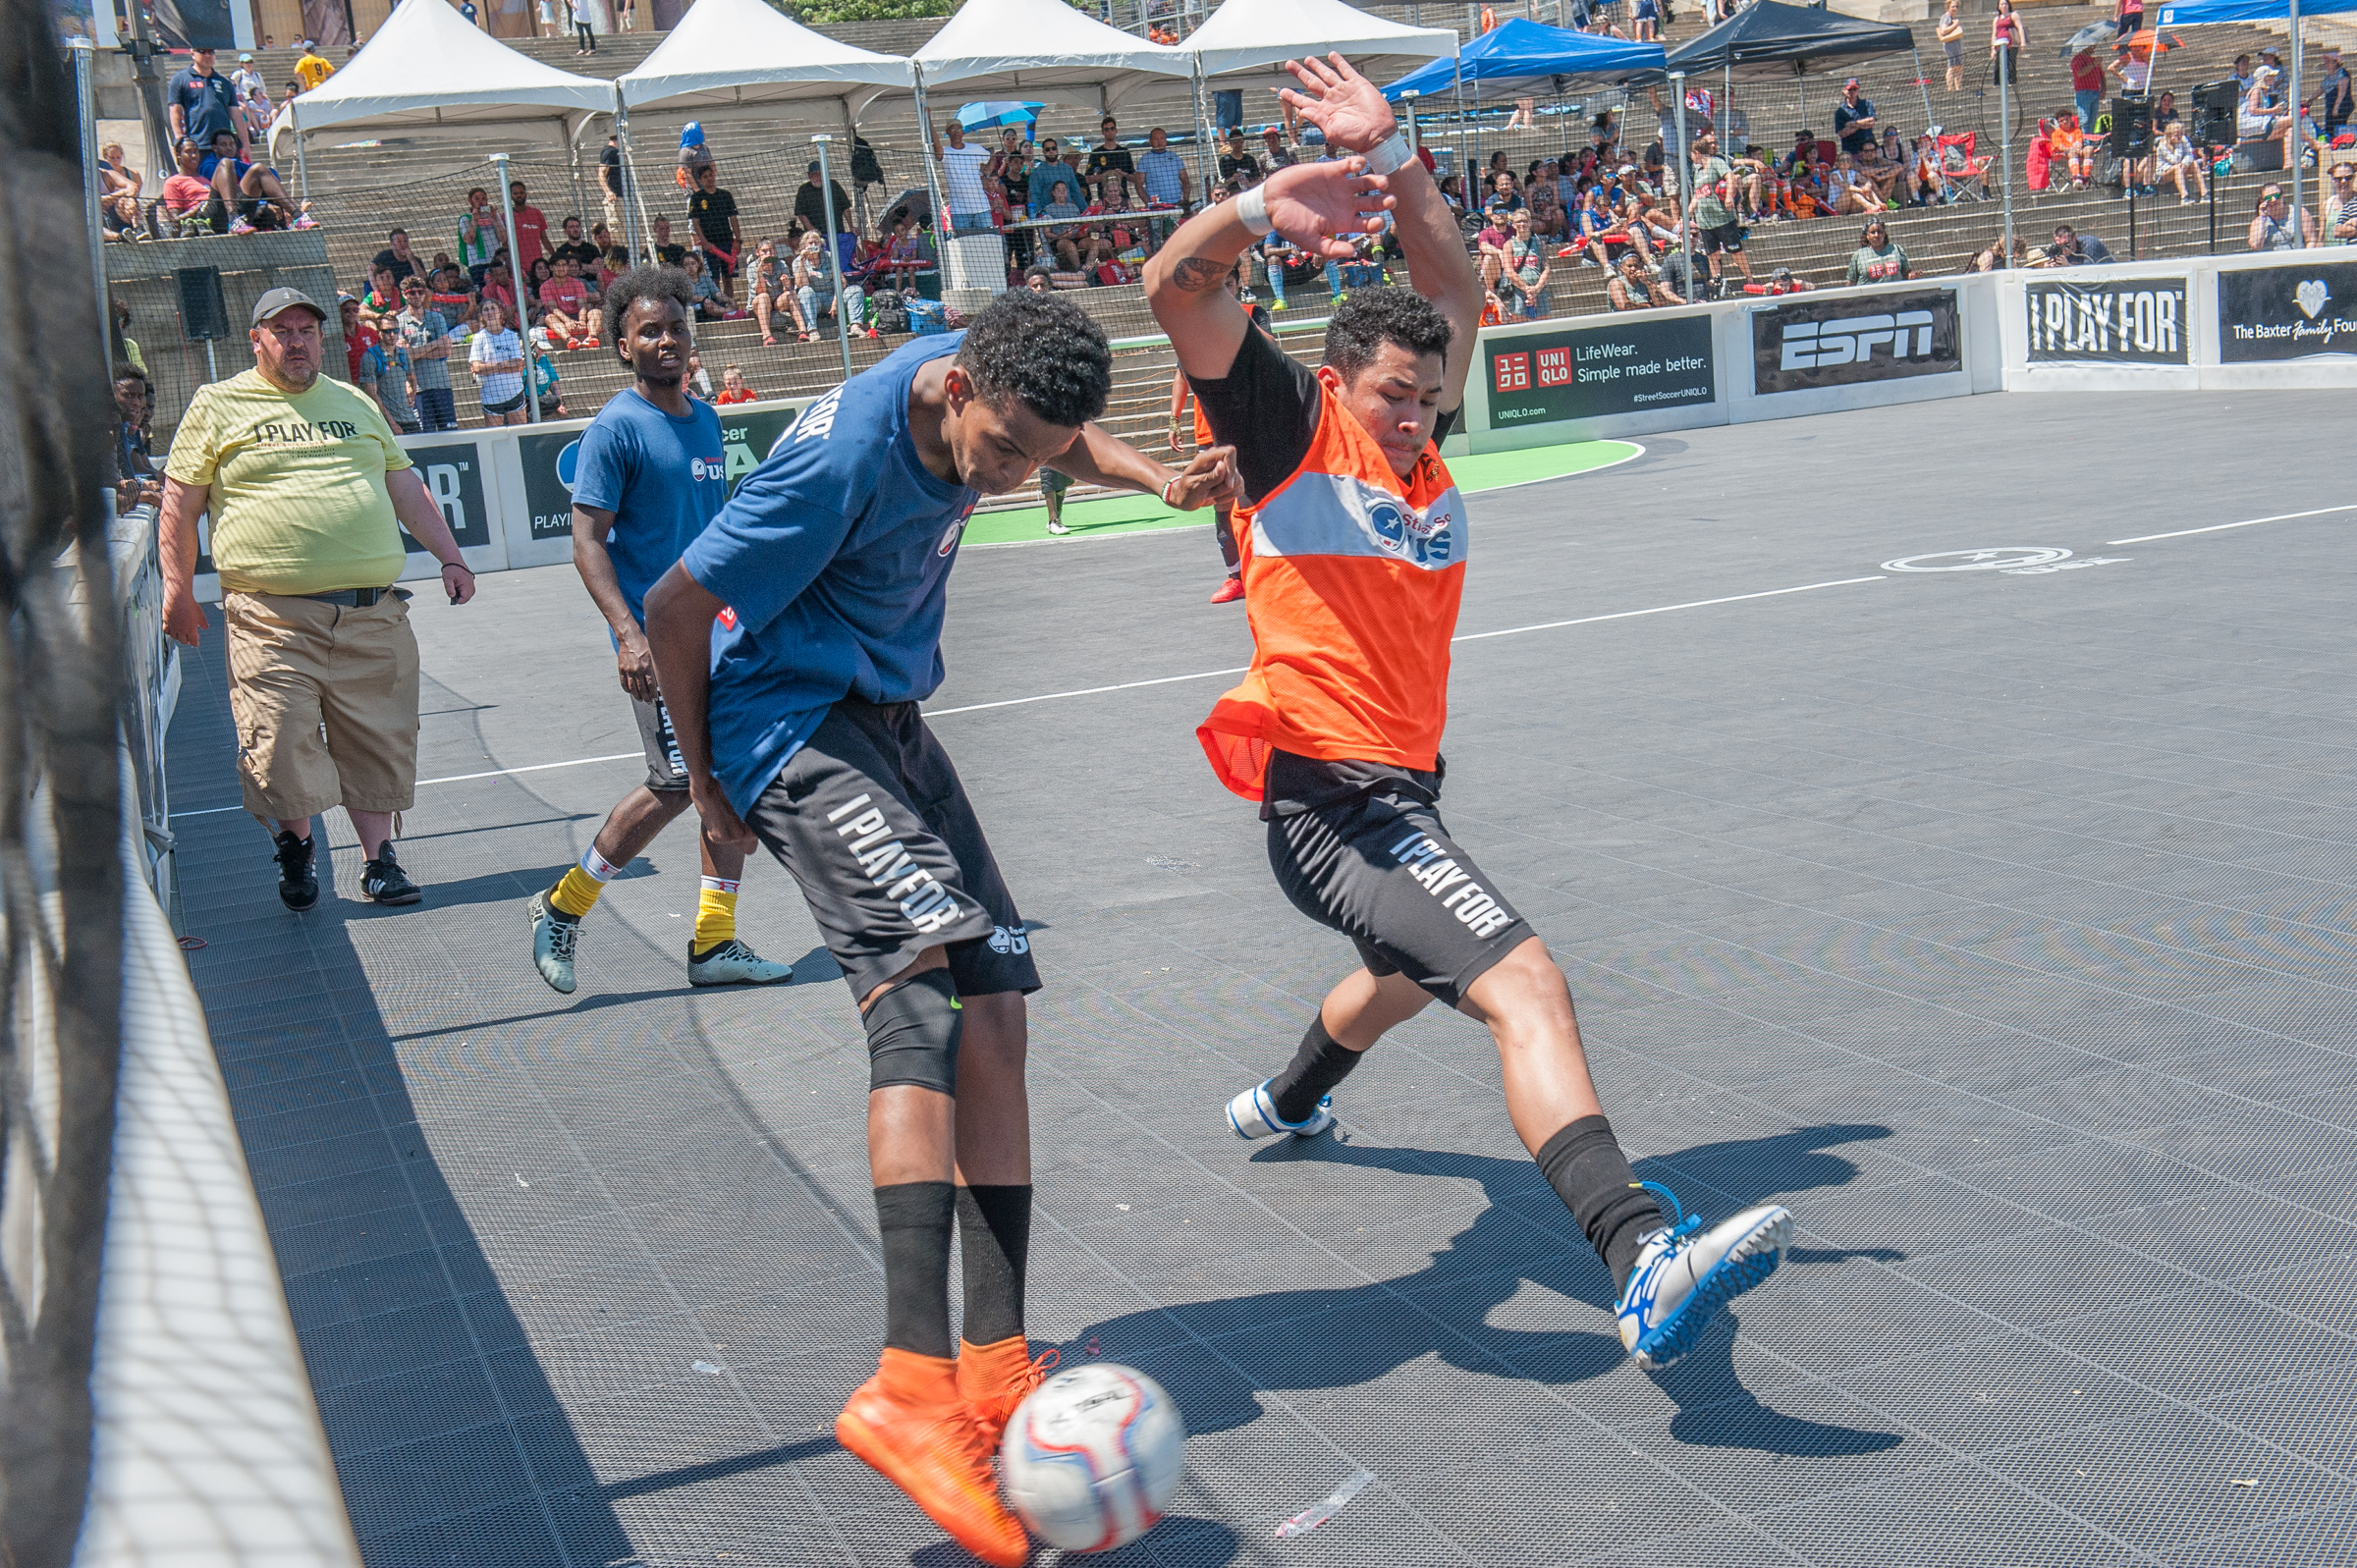 Street Soccer USA’s National Cup Shares the Beautiful Game With Those in Need